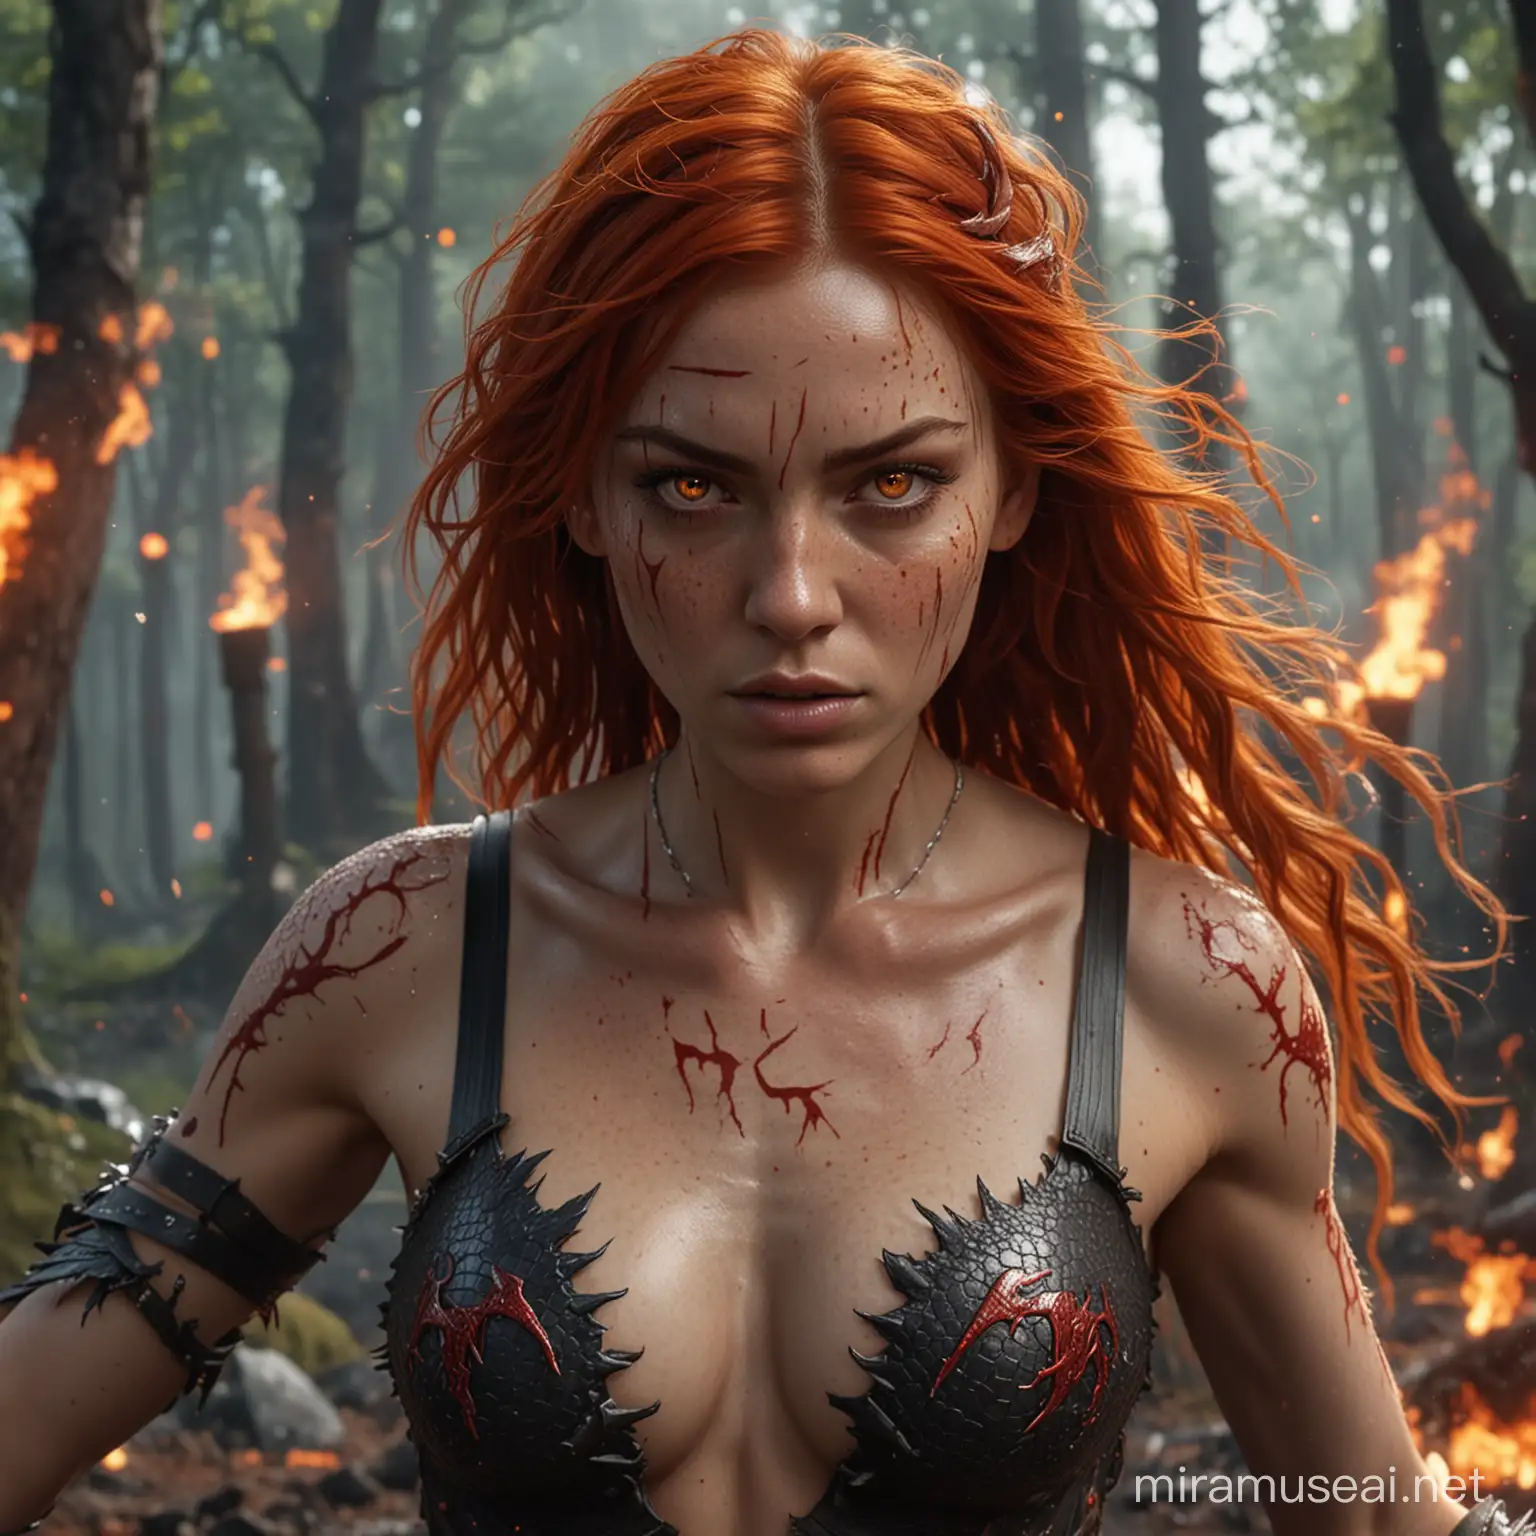 Fiery RedHaired Female Warrior with Draconic Symbols Battling in Forest